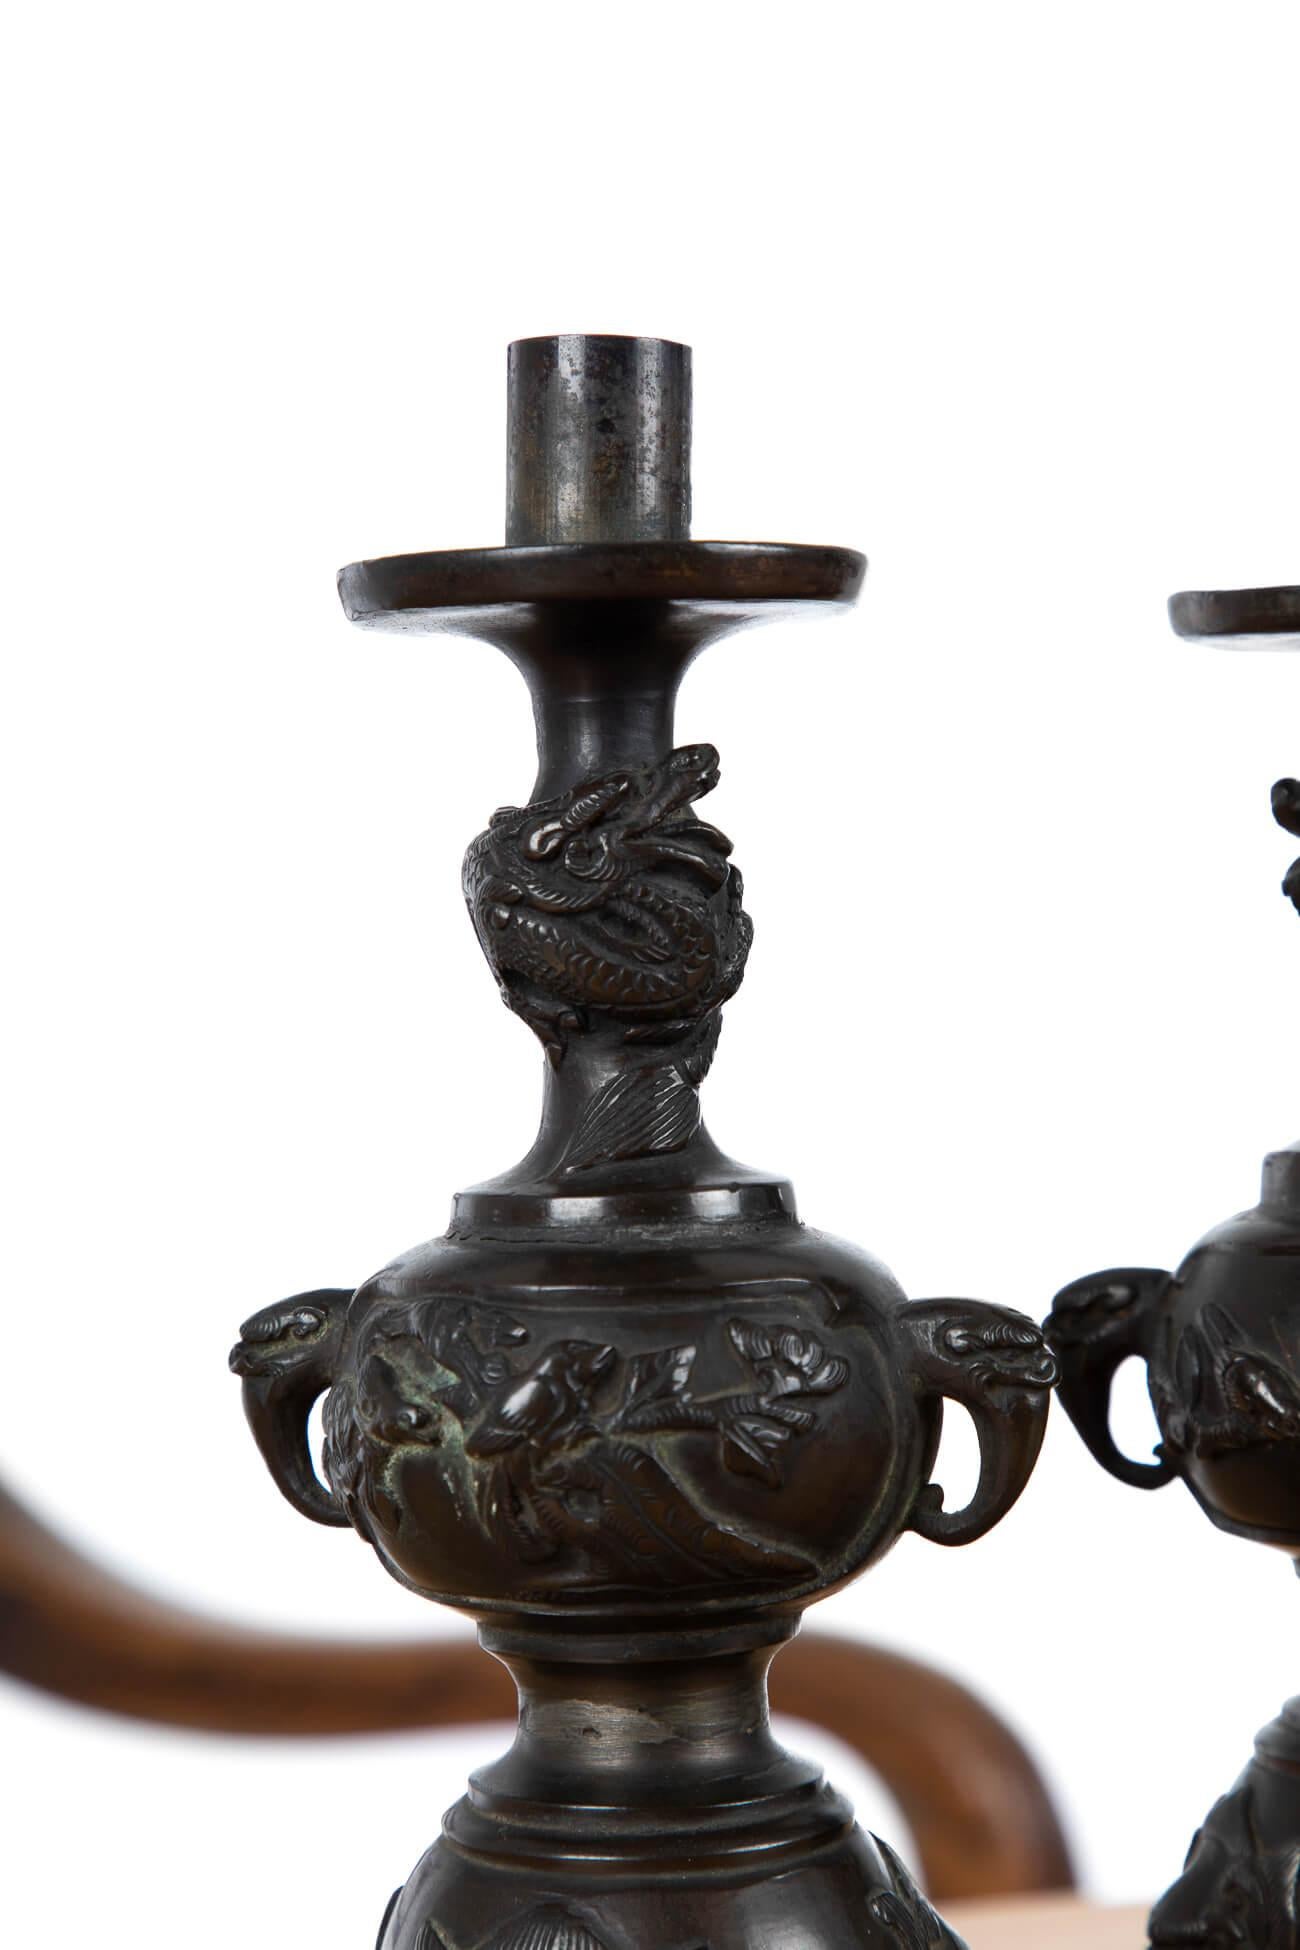 Anglo-Japanese Pair of Meiji Period Japanese Bronze Candlesticks, circa 1870 For Sale